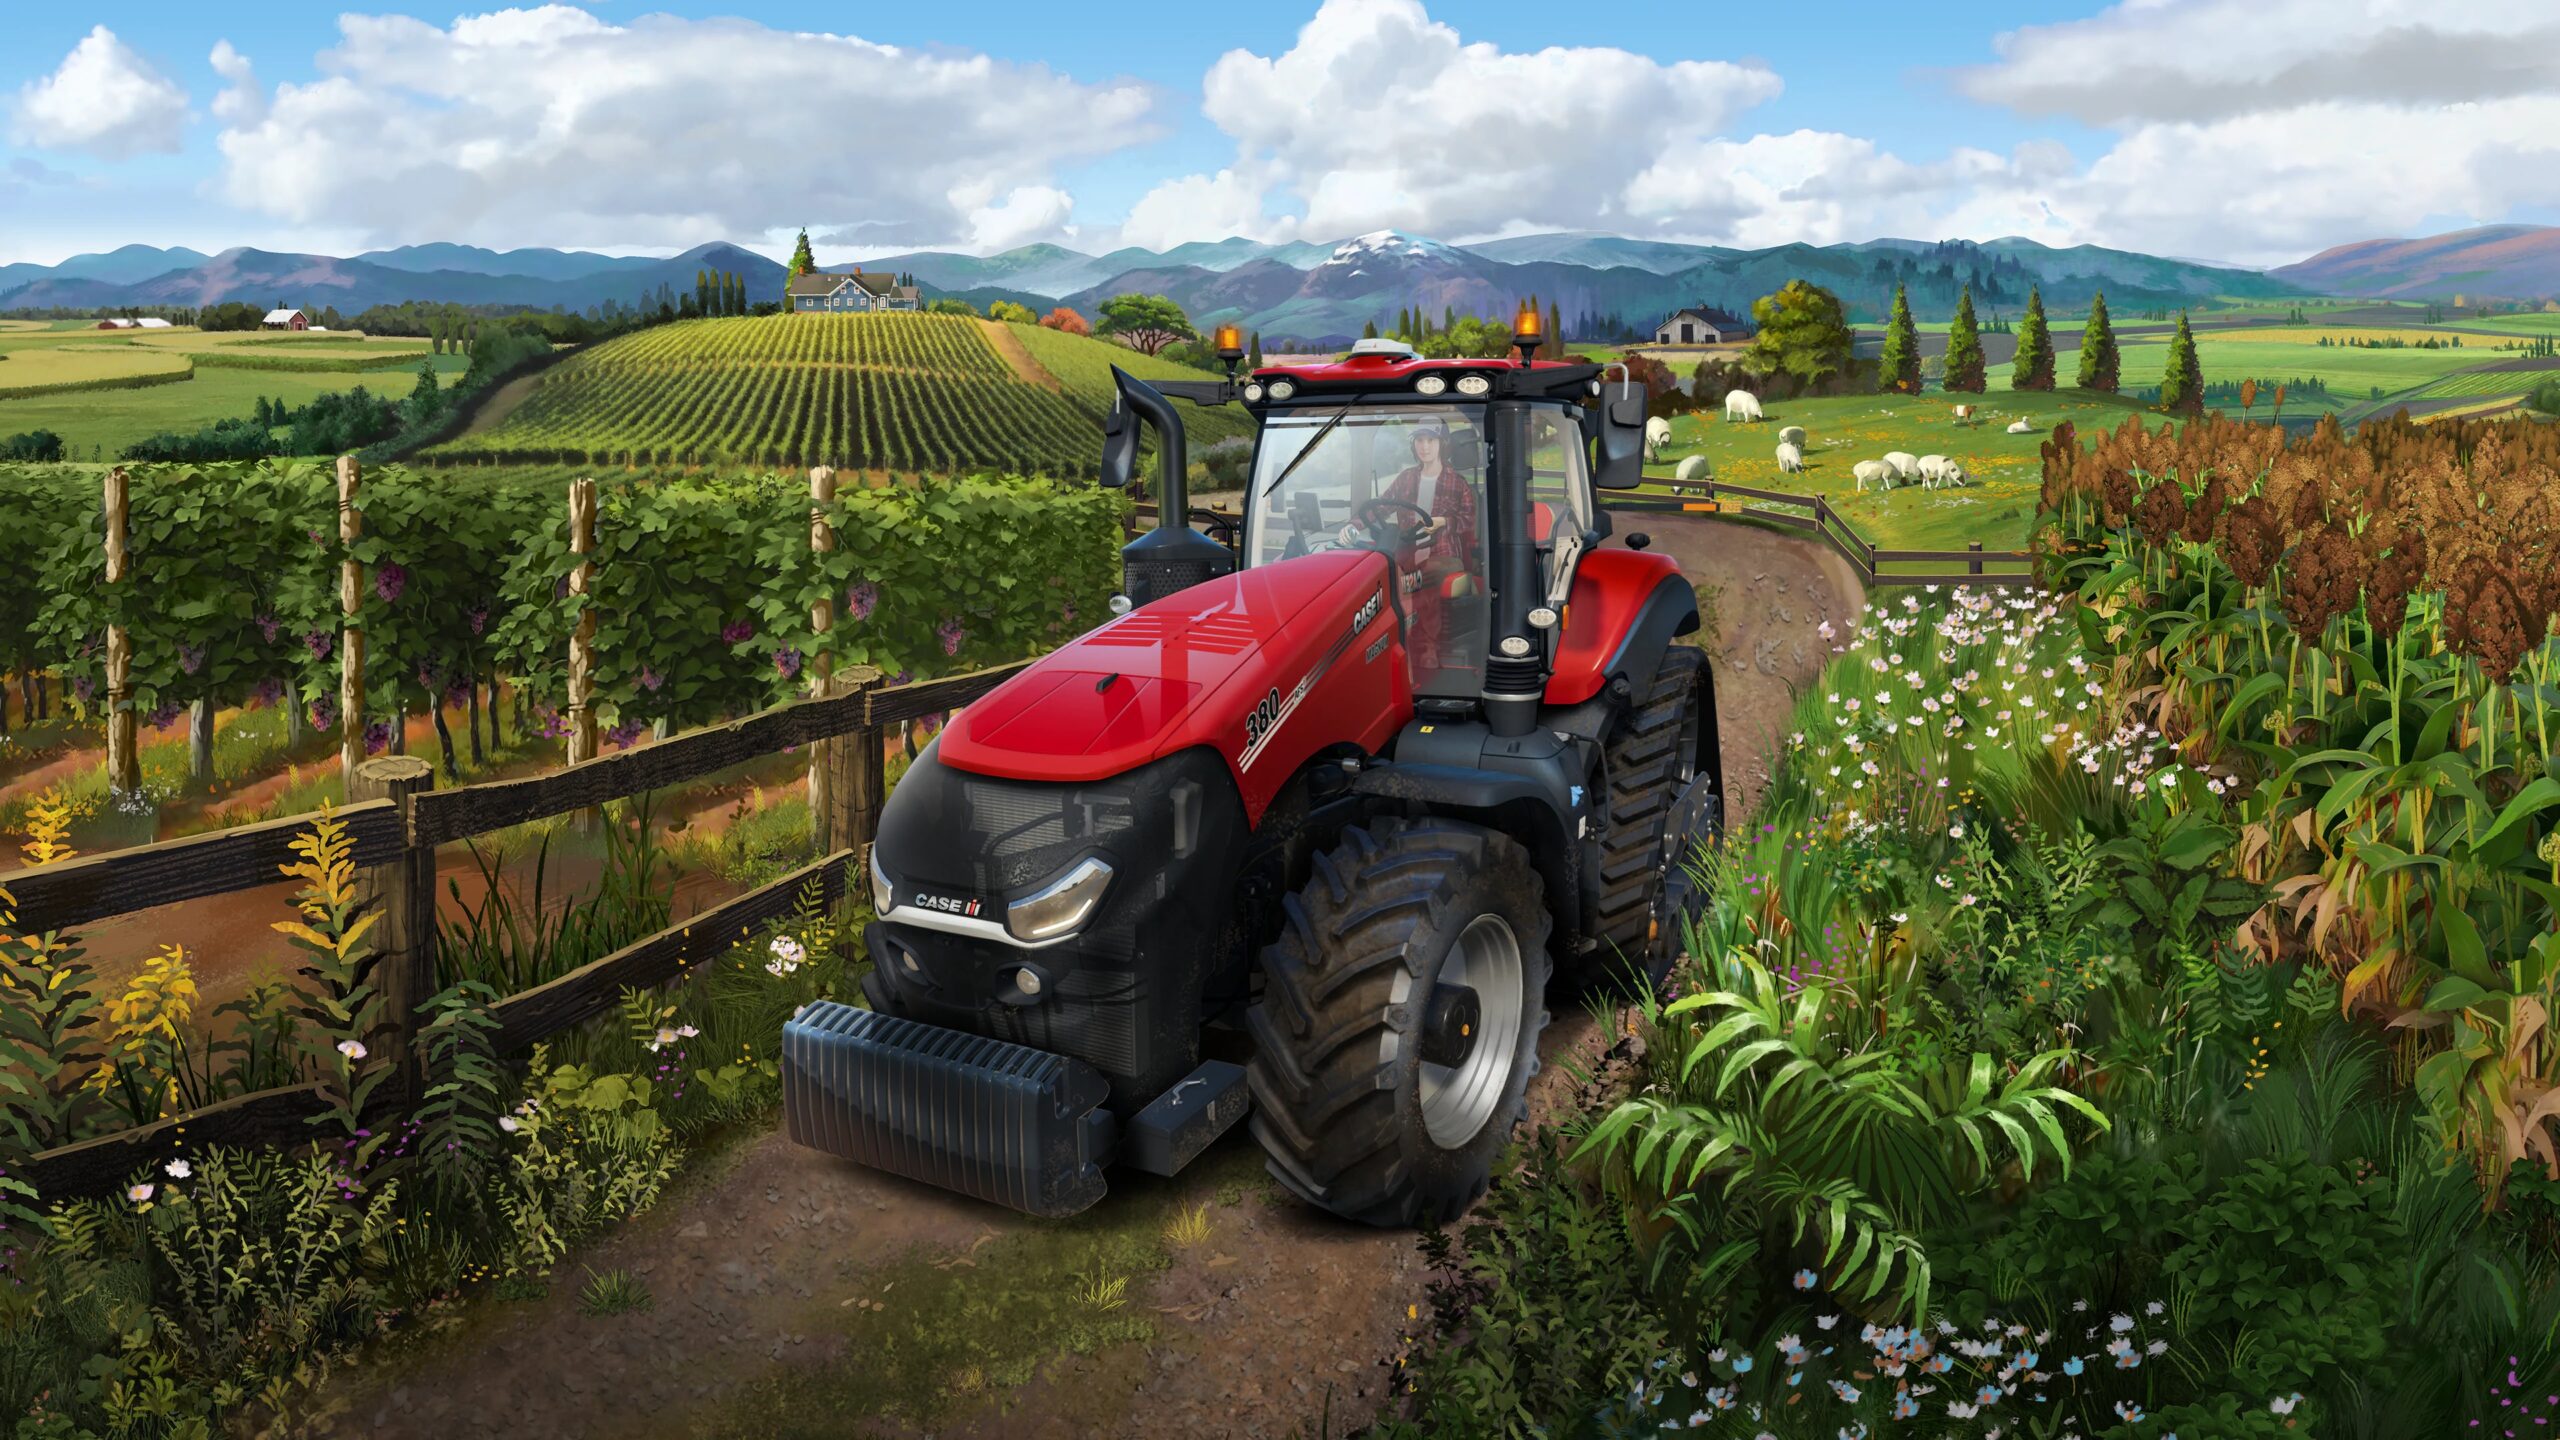 The Epic Video games Retailer is making a gift Farming Simulator 22 without cost